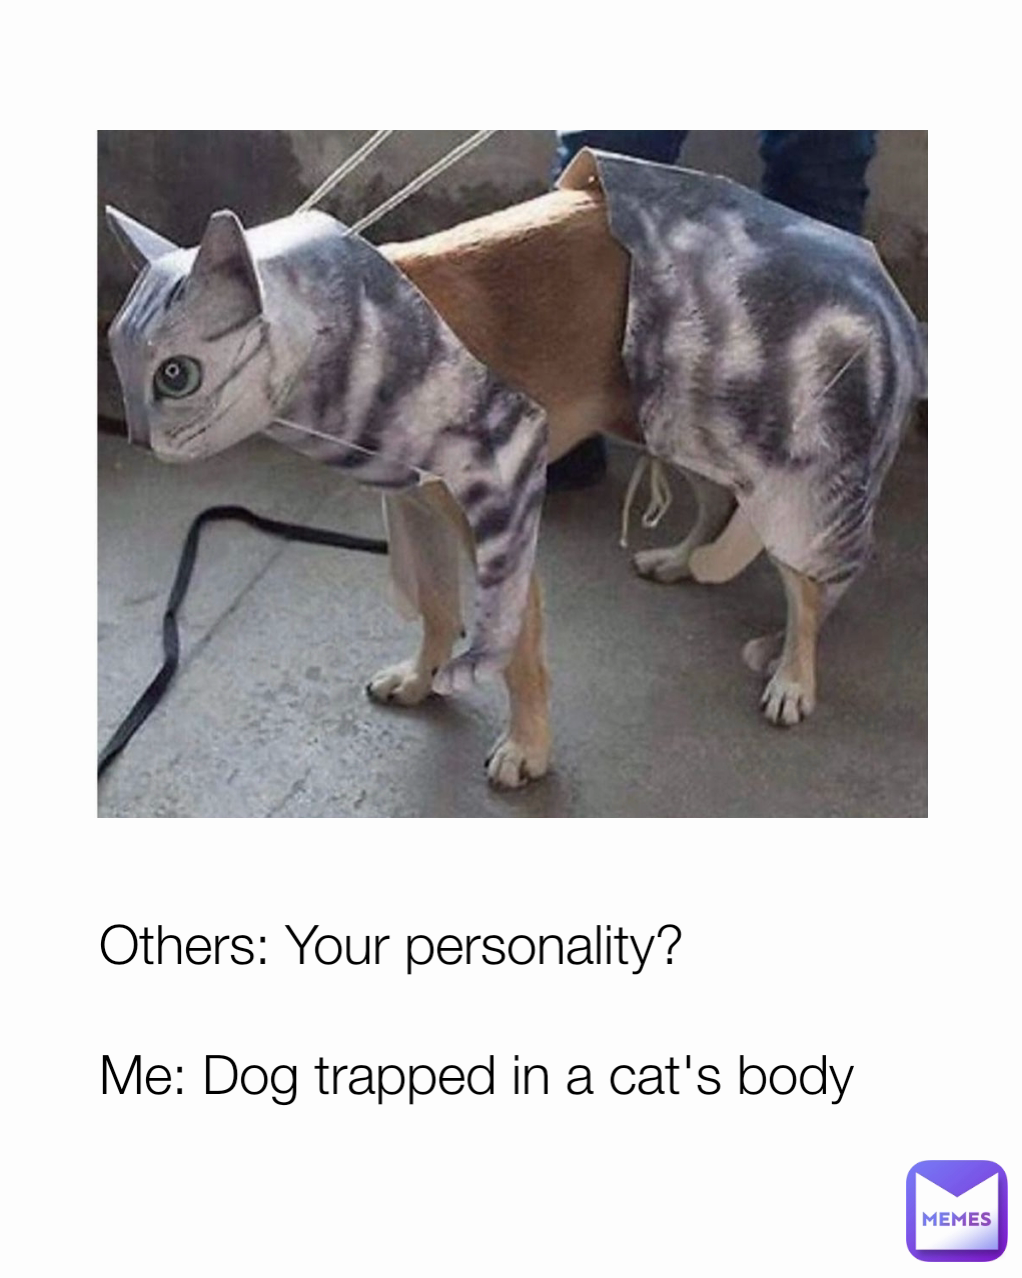 Others: Your personality? 

Me: Dog trapped in a cat's body